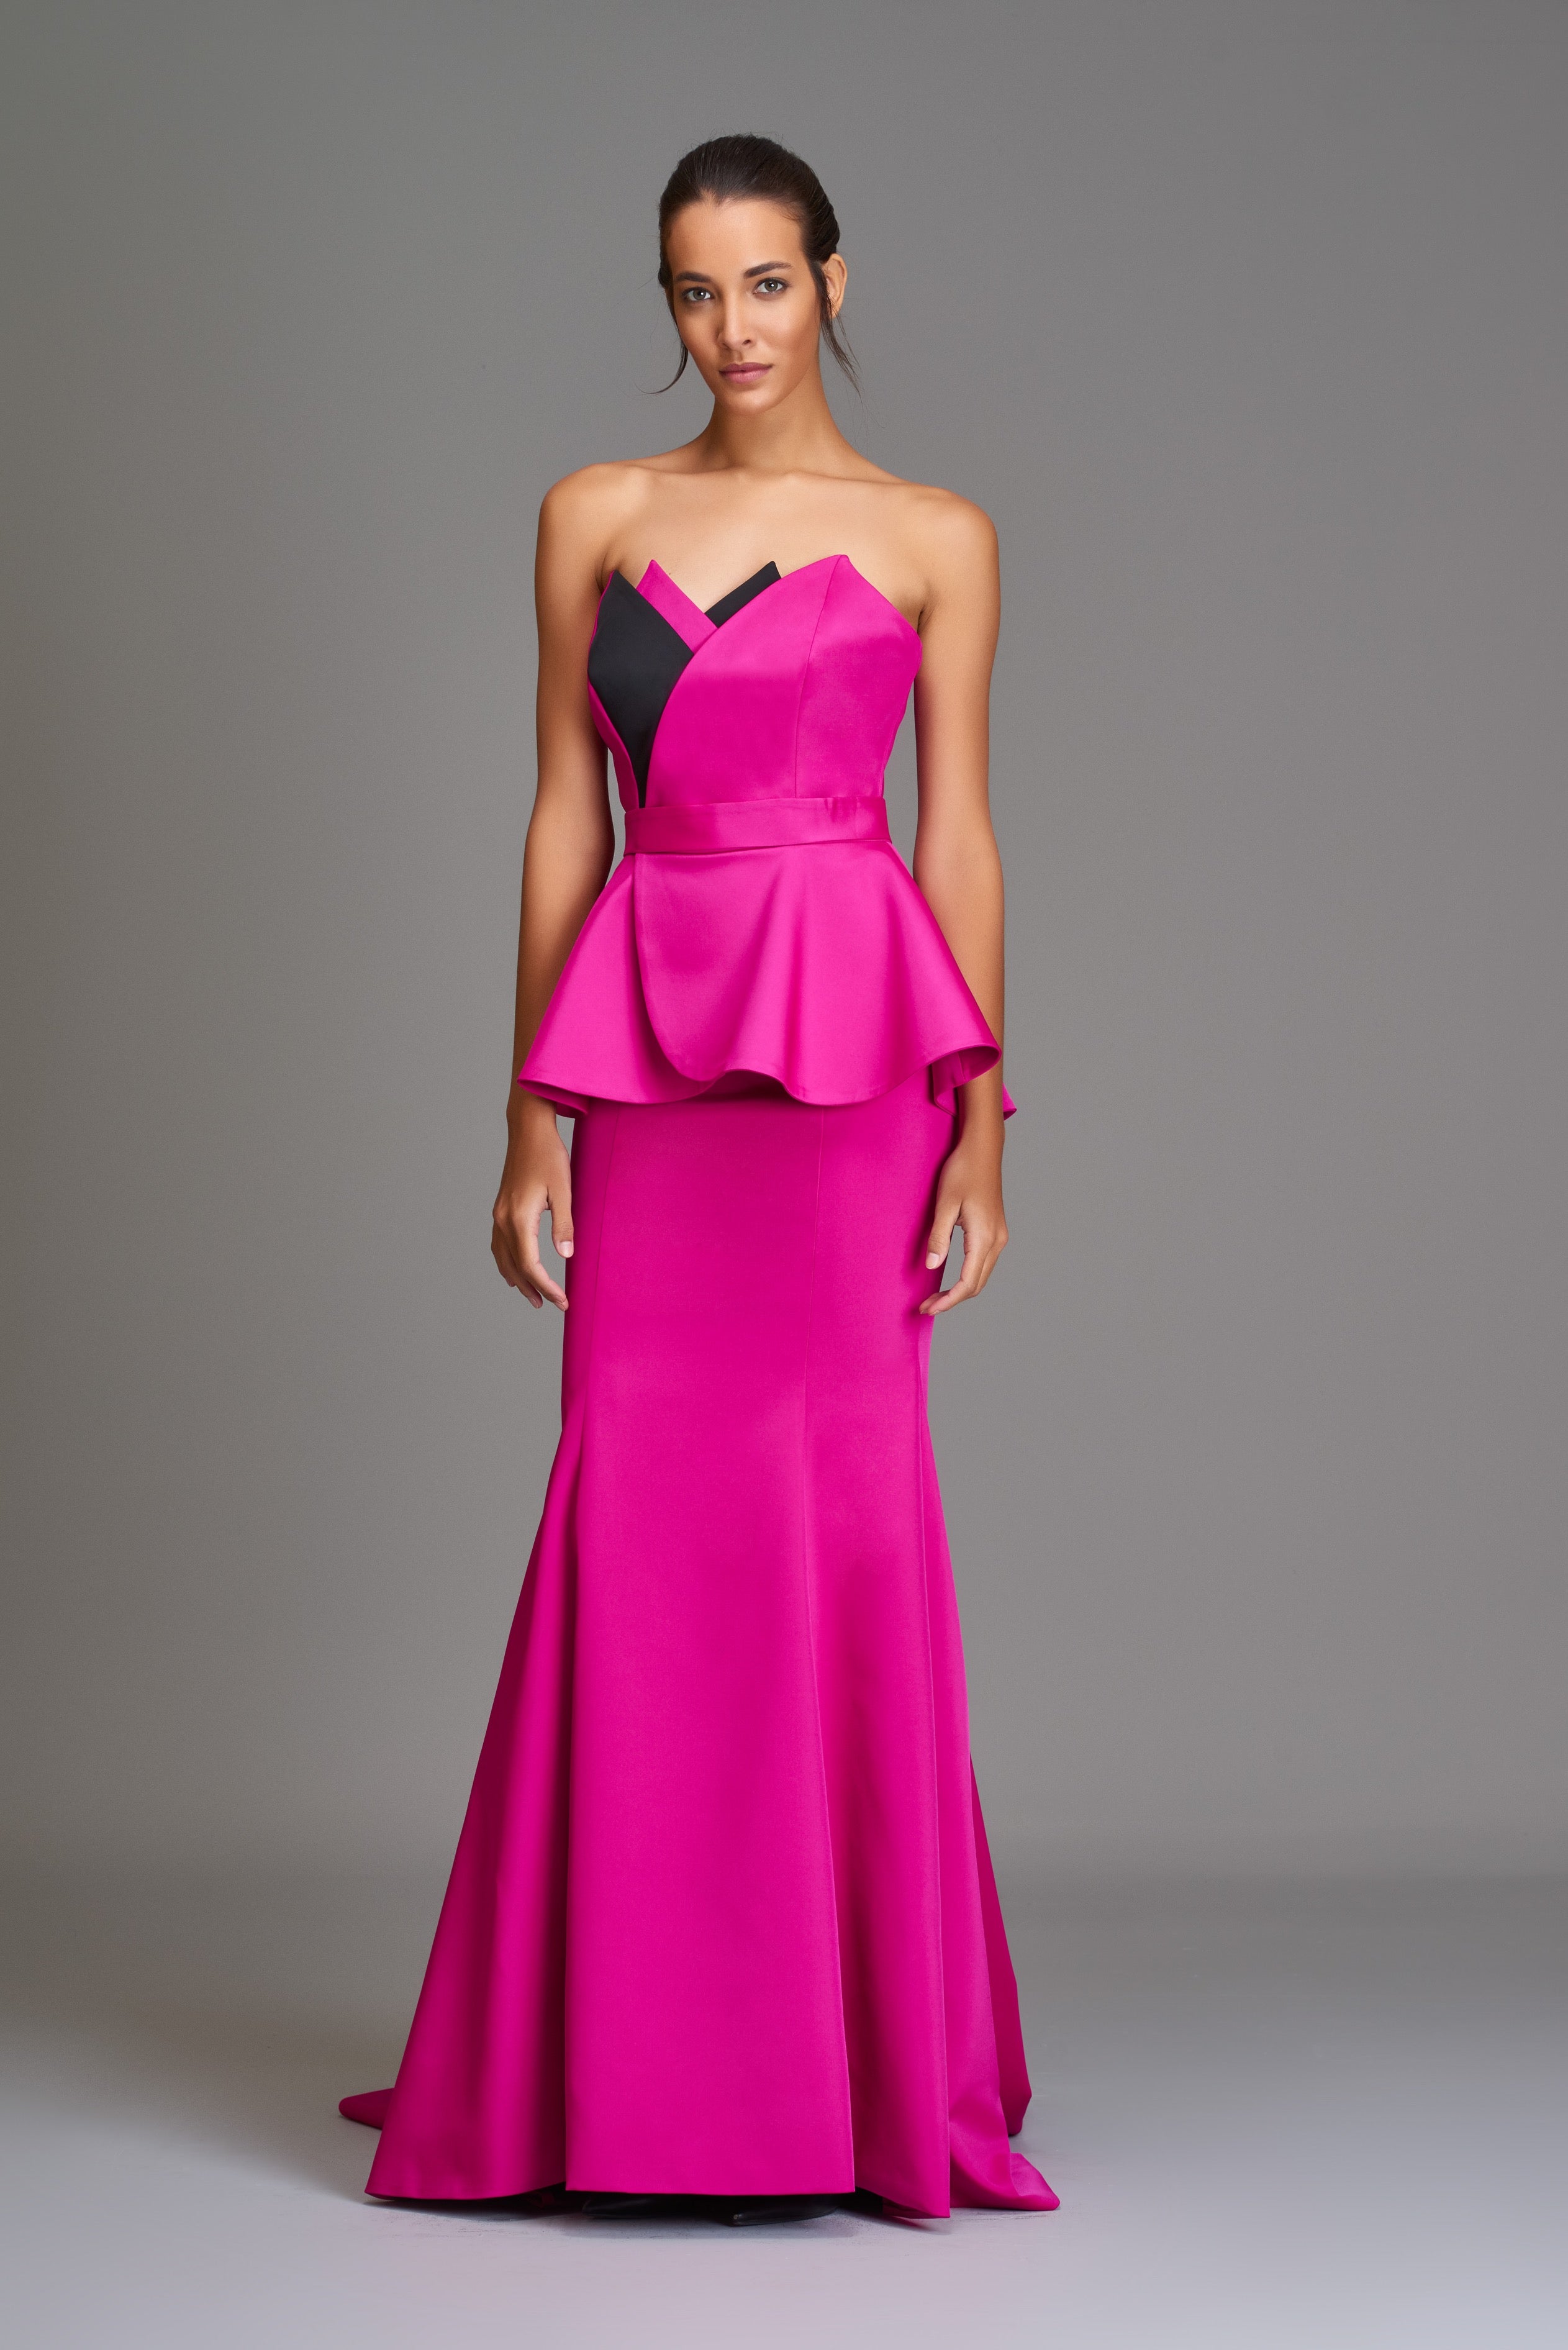 Two-Toned Mermaid Gown